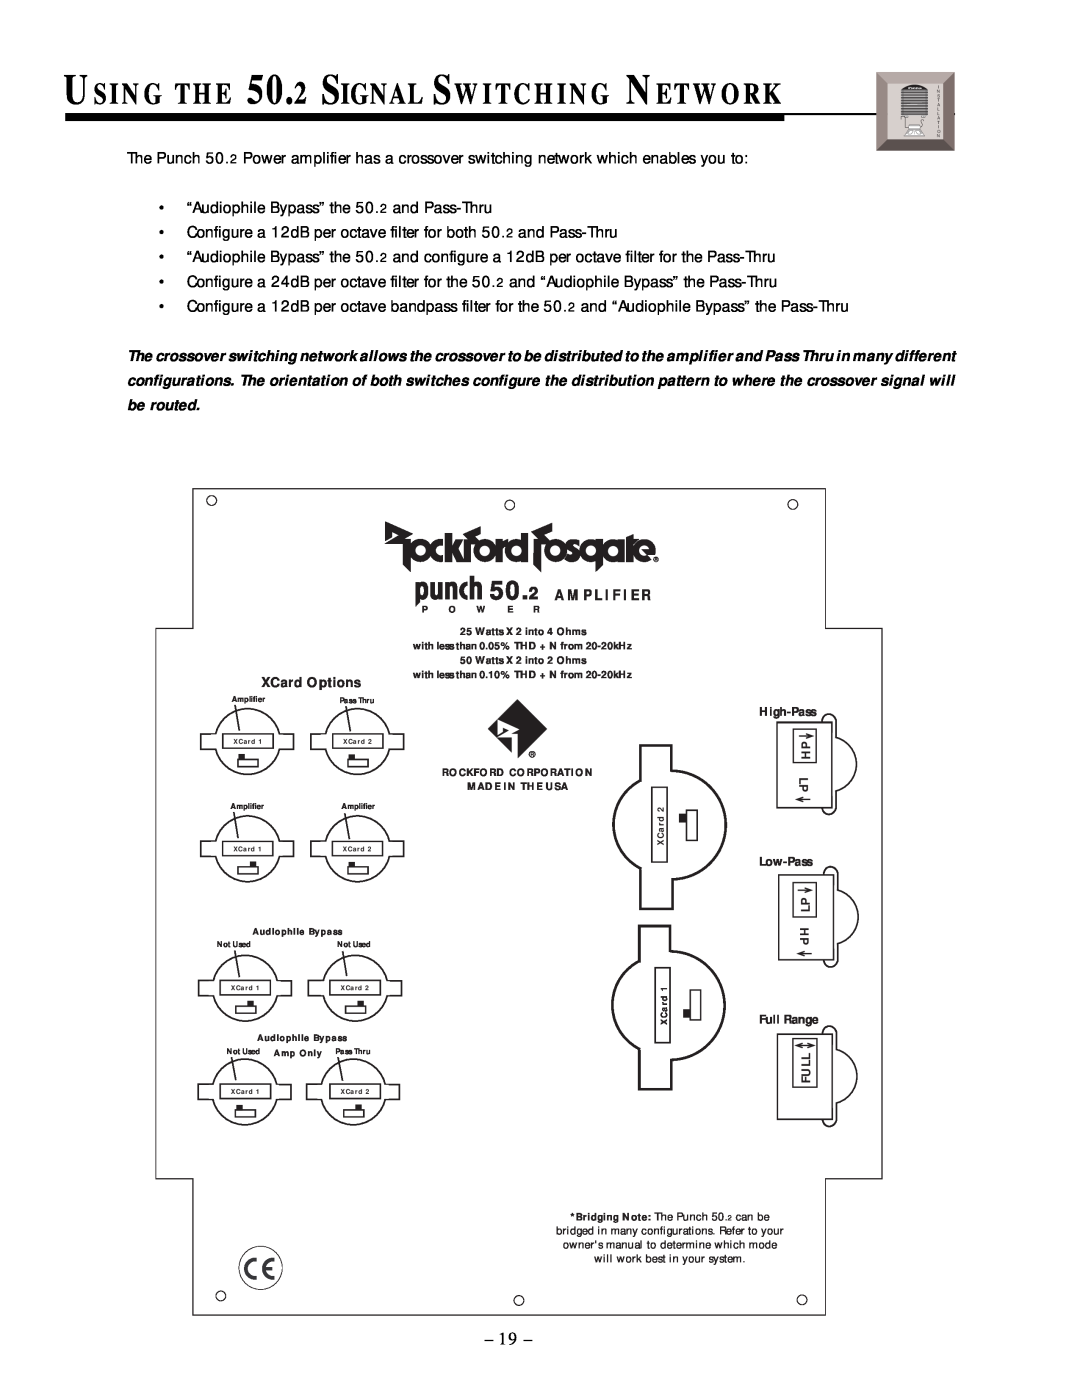 Rockford Fosgate 50.1 manual USING THE 50.2 SIGNAL SWITCHING NETWORK 